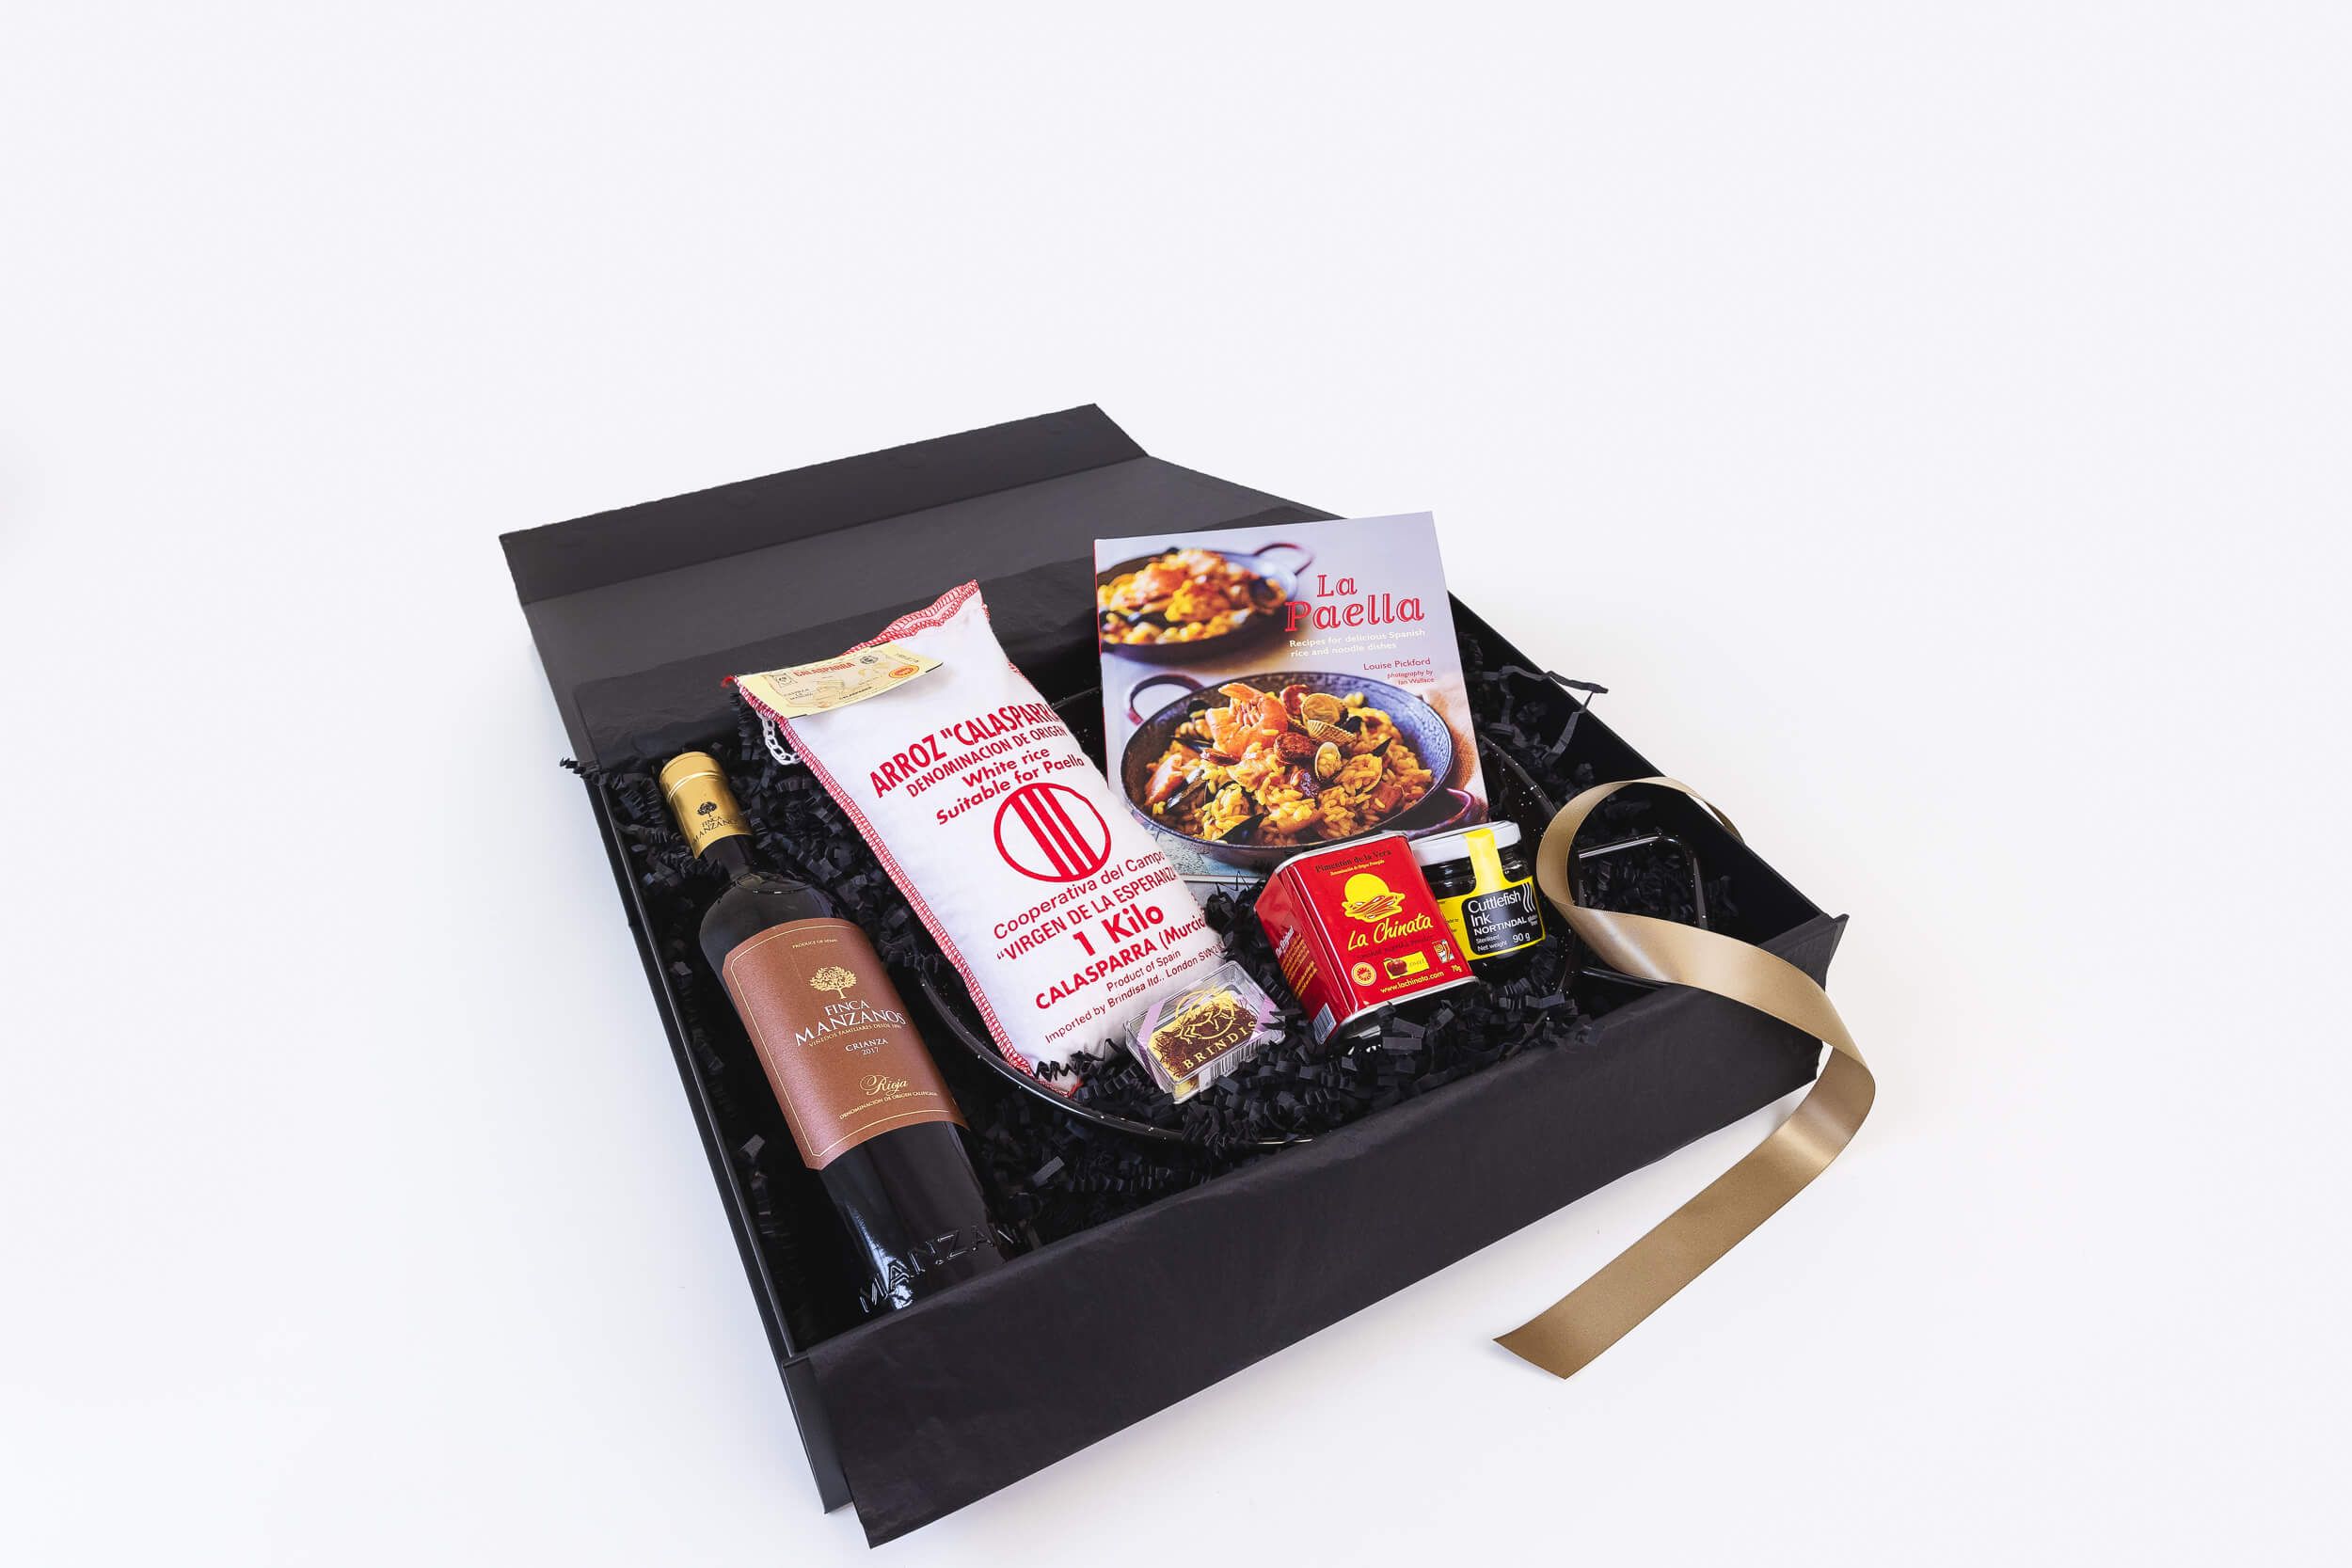 New year corporate gifts including ingredients for a Spanish feast